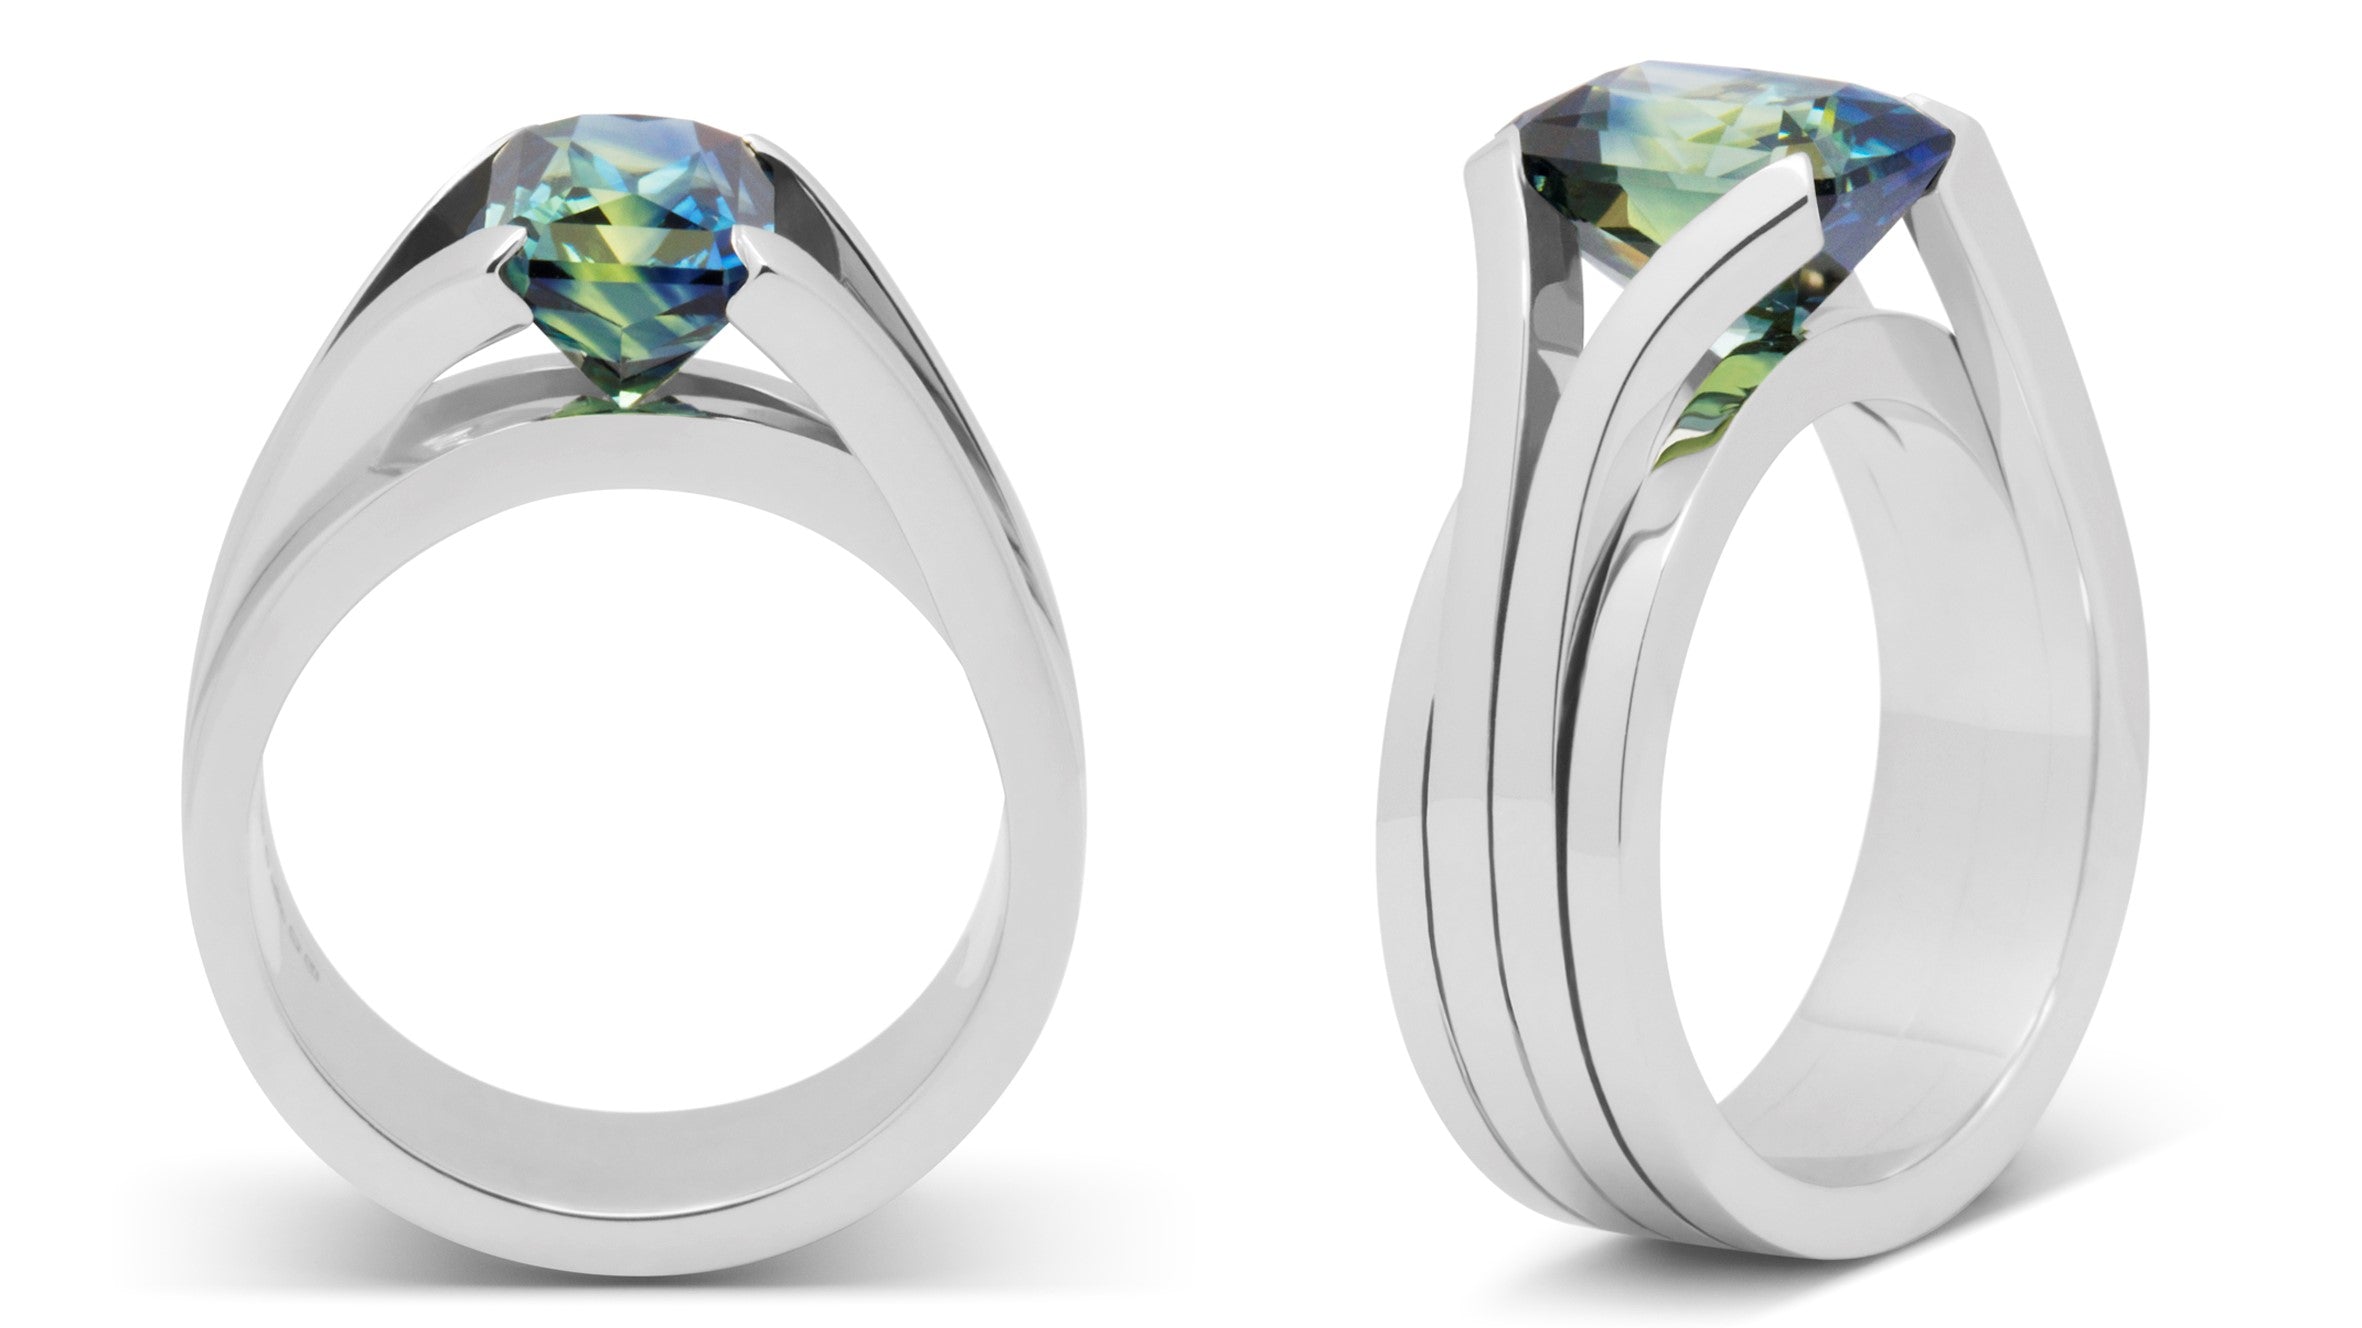 Bespoke platinum and blue green sapphire engagement ring design and made for Matt, by Amanda Mansell